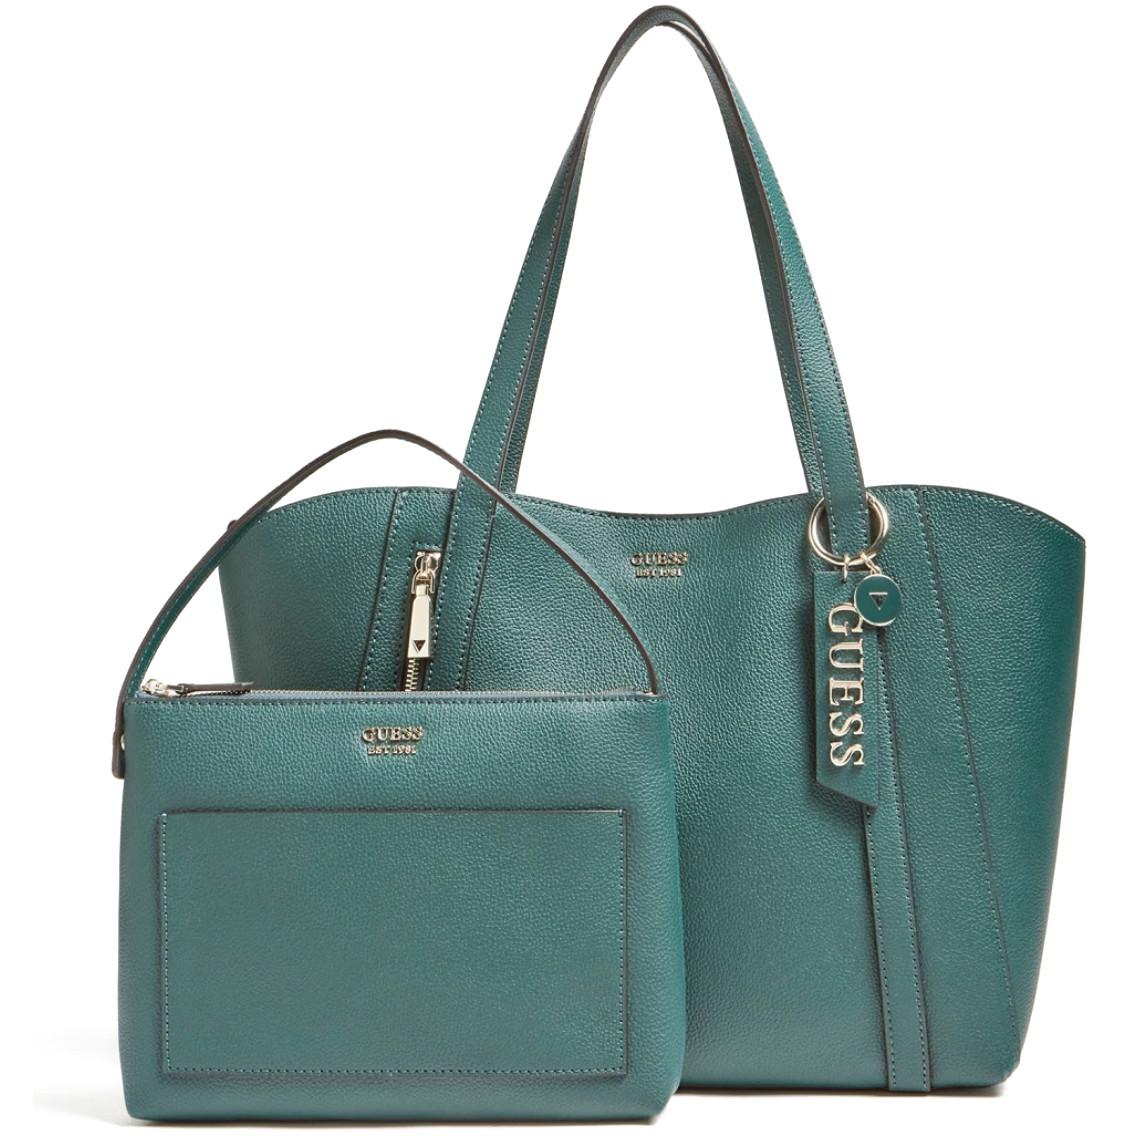 Guess green vegan leather purse - clothing & accessories - by owner -  apparel sale - craigslist